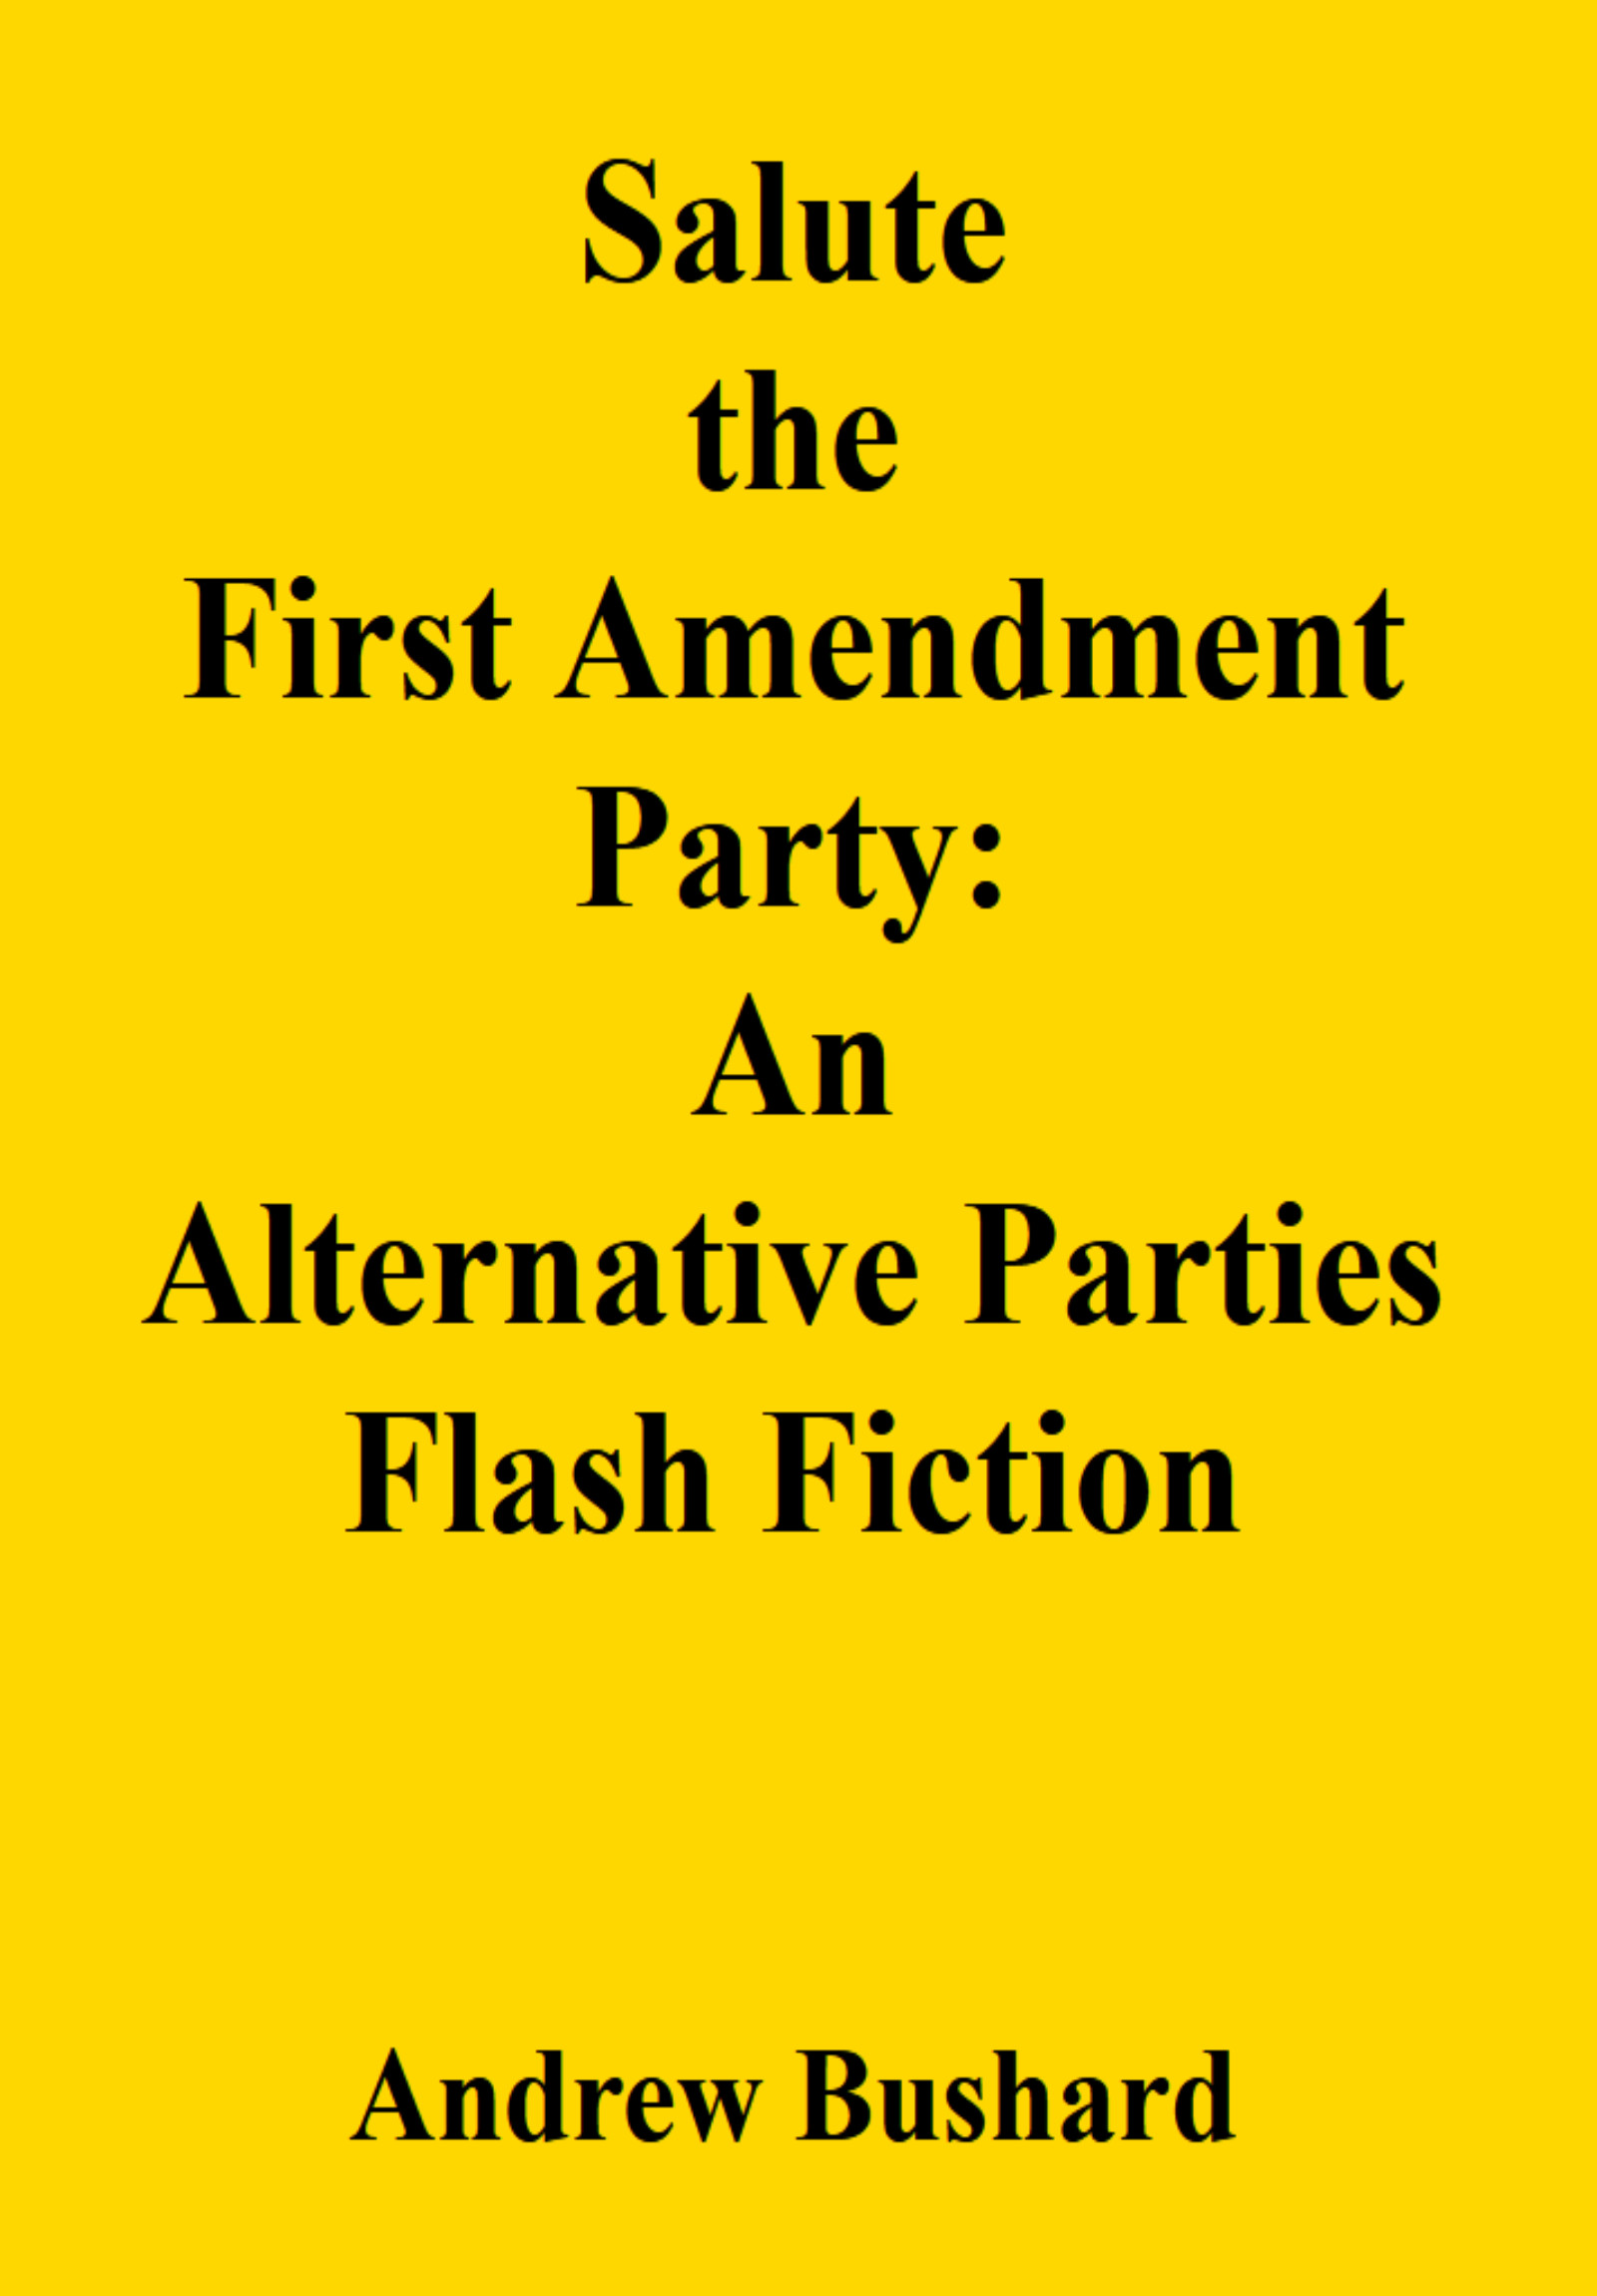 Salute the First Amendment Party: An Alternative Parties Flash Fiction's featured image